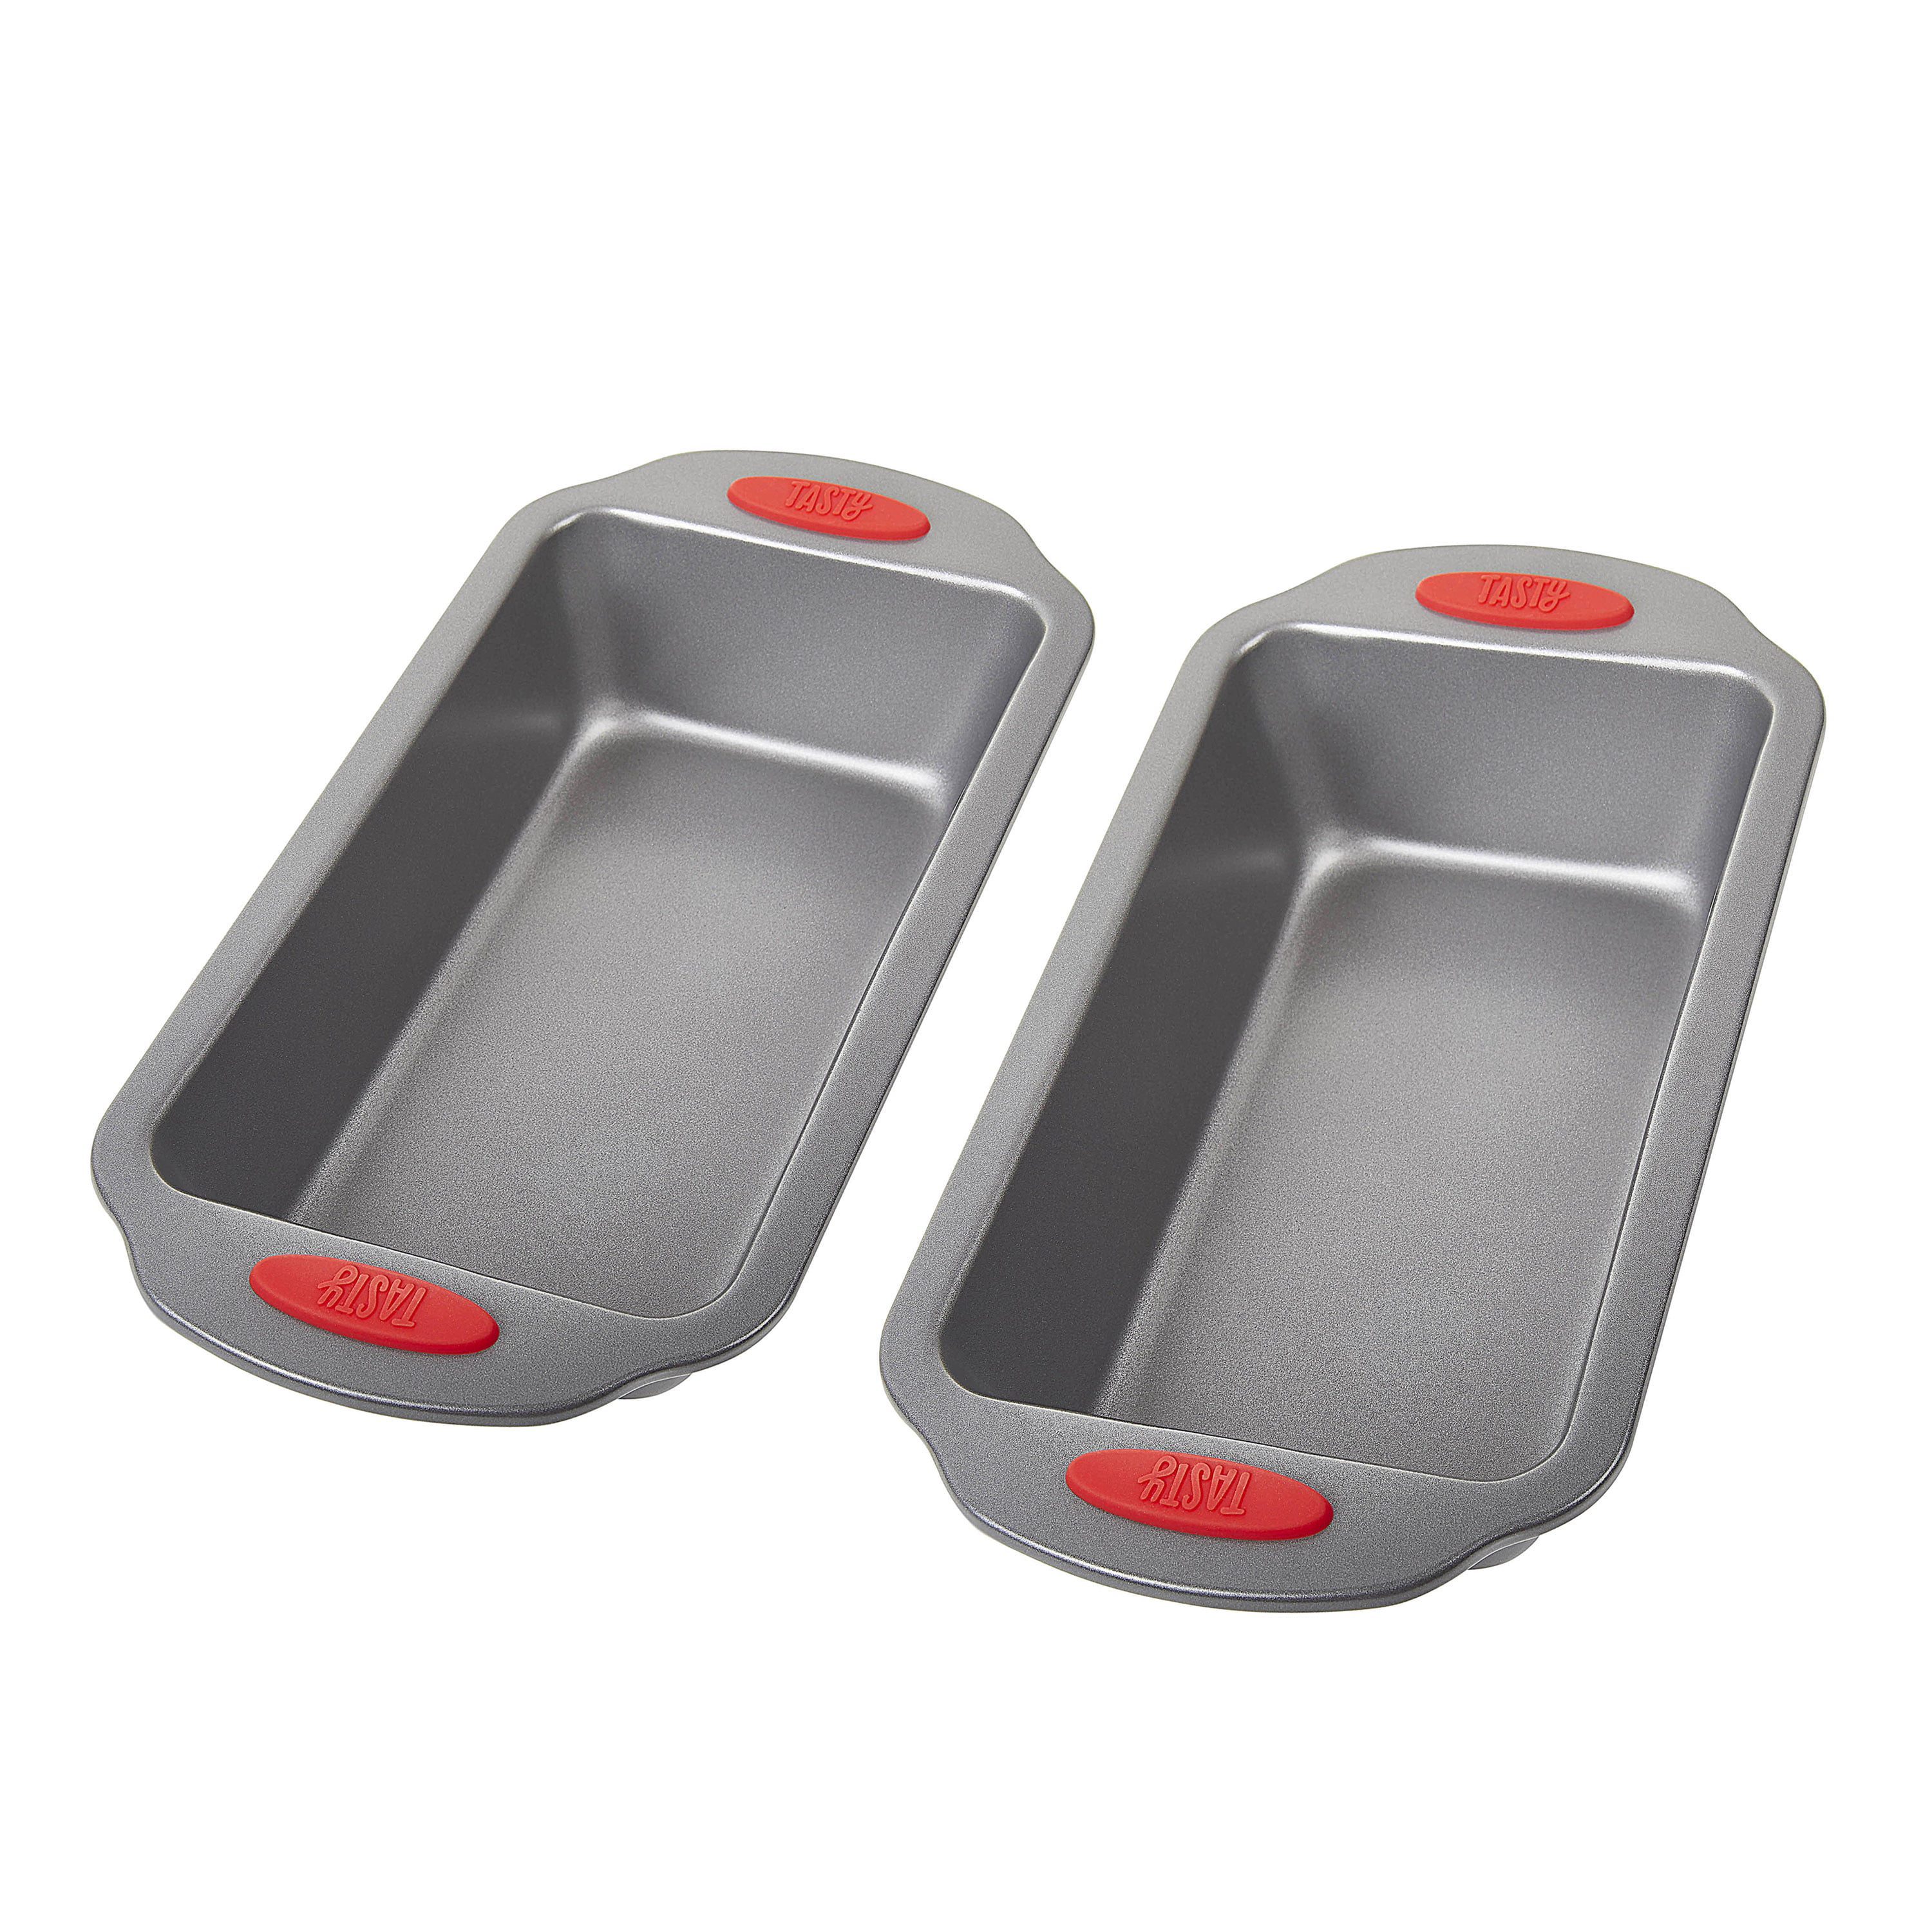 SILIVO 4 Pack Mini Loaf Pans, 5.7x2.5x2.2 inch, Nonstick, Silicone, Red